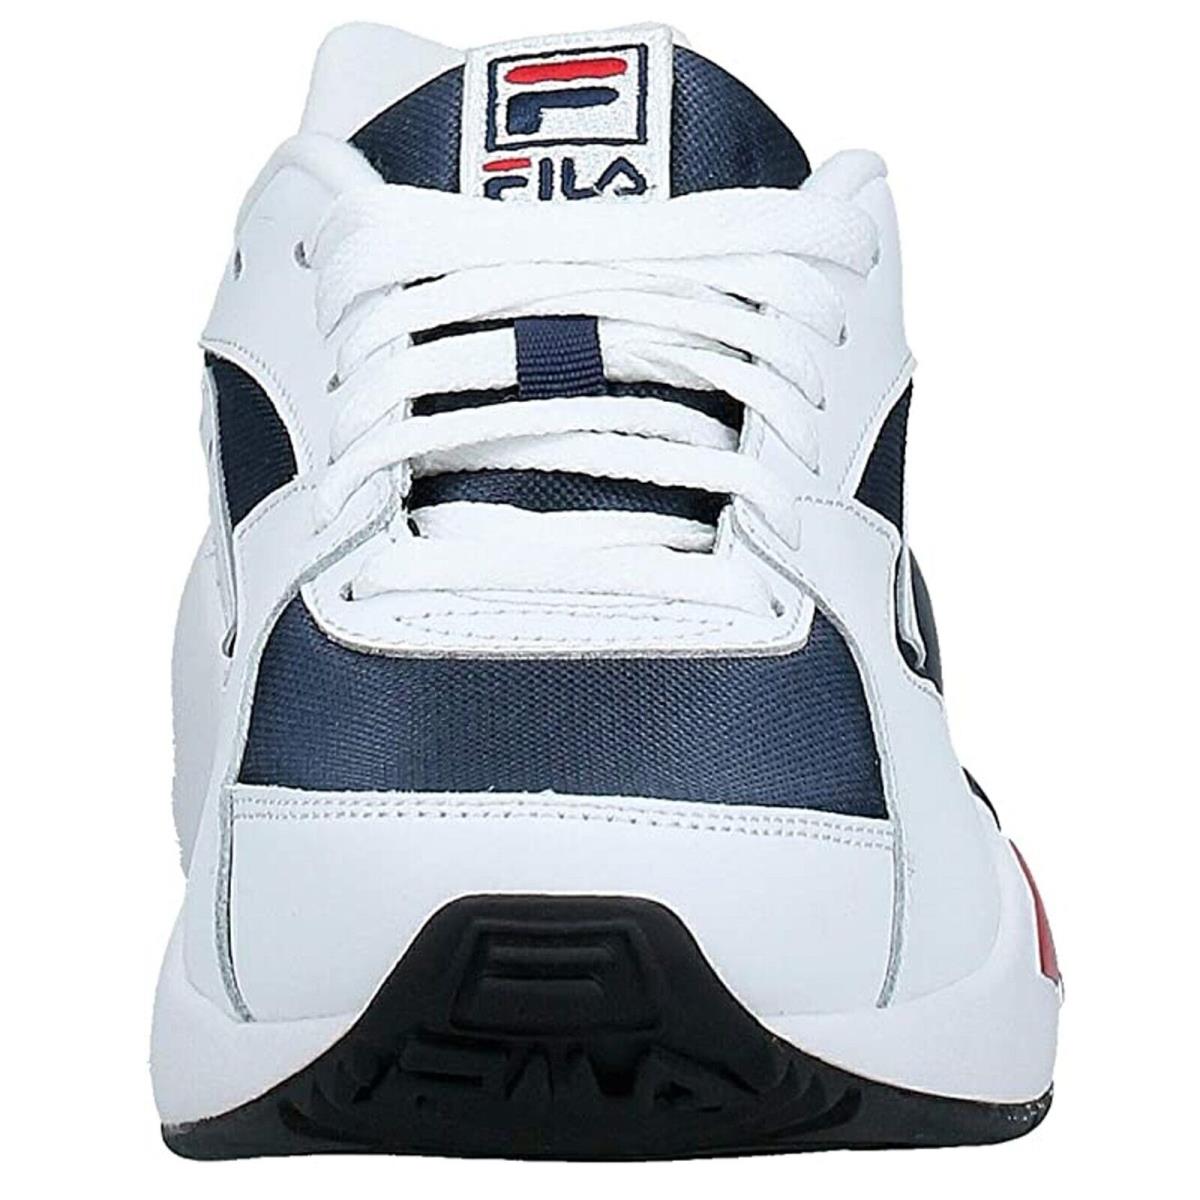 Fila Men`s Mindblower Mid-top Athletic Fashion Sneakers Trainers Size: 11.5 - White